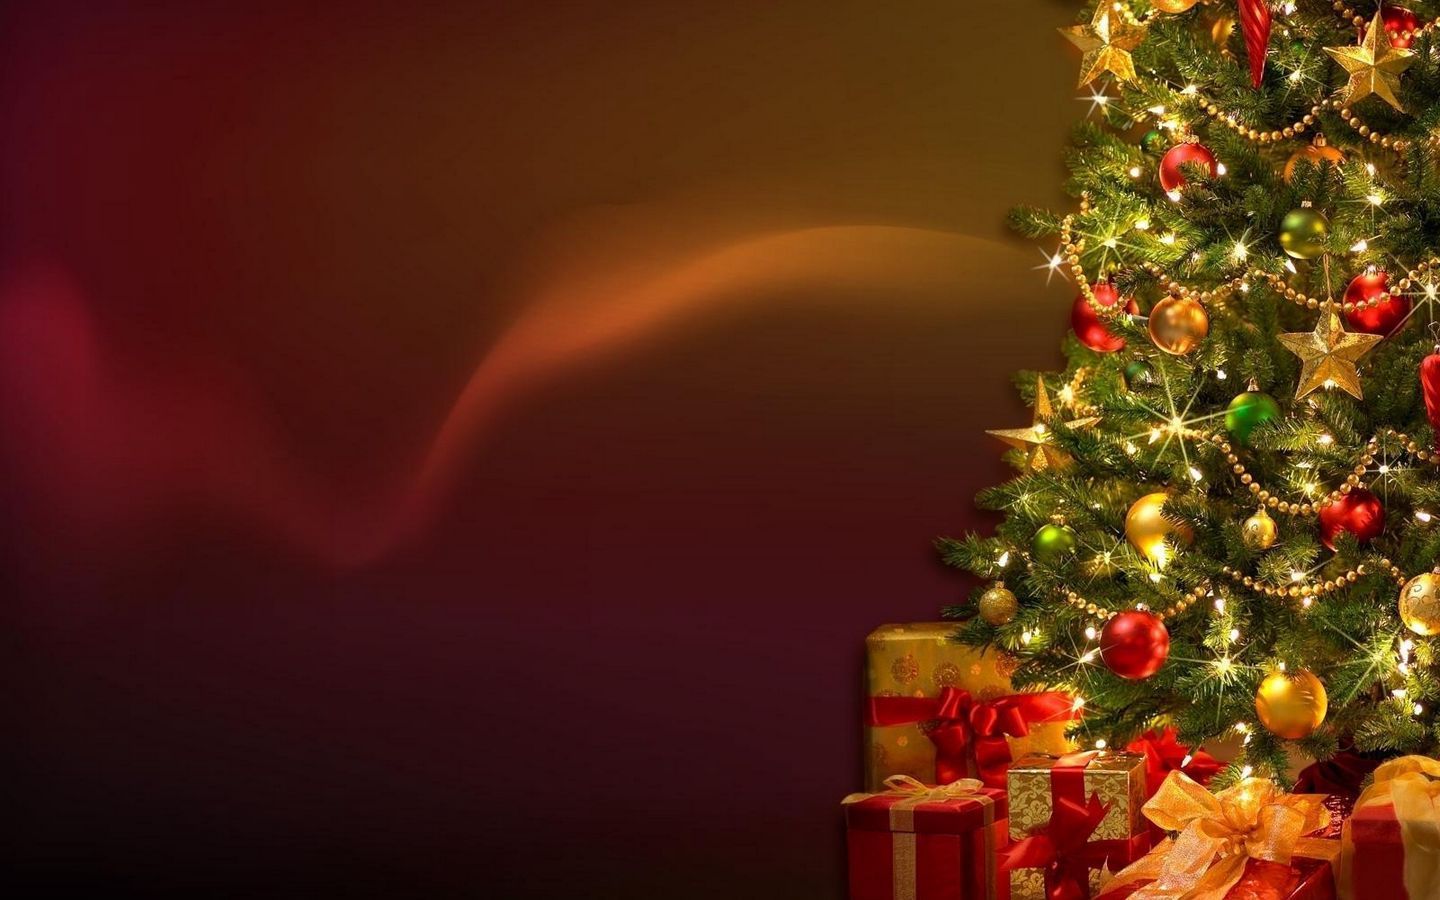 Download wallpaper 1440x900 christmas tree, garland, gifts, decorations, holiday, new yea widescreen 16:10 HD background